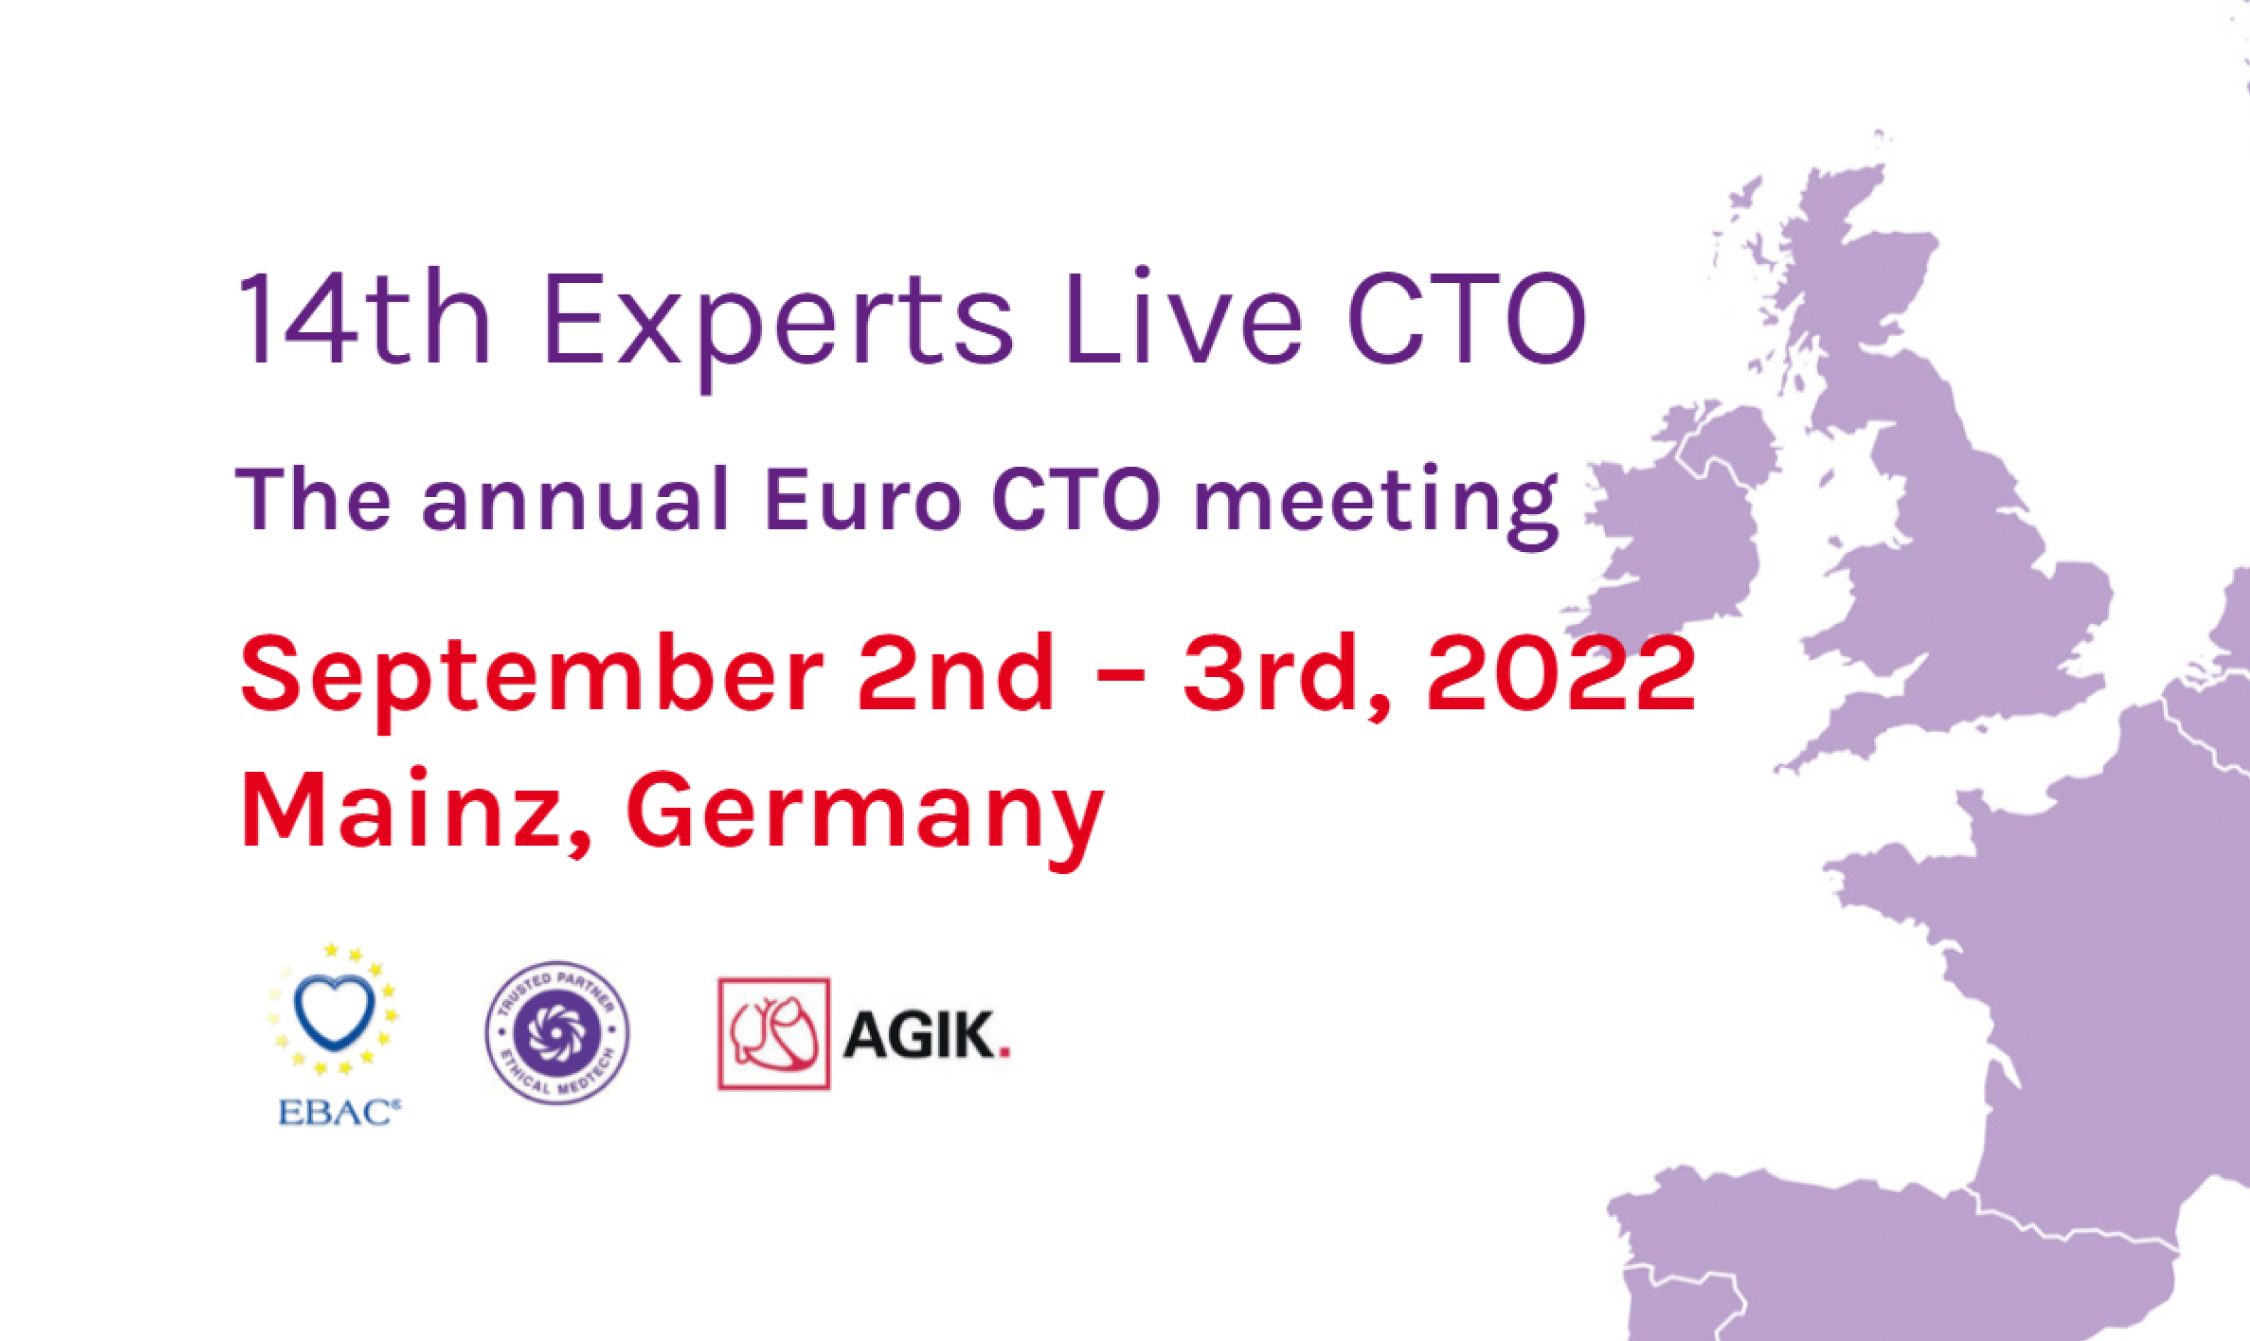 14th Experts Live CTO The annual Euro CTO meeting September 2nd – 3rd, 2022 Mainz, Germany